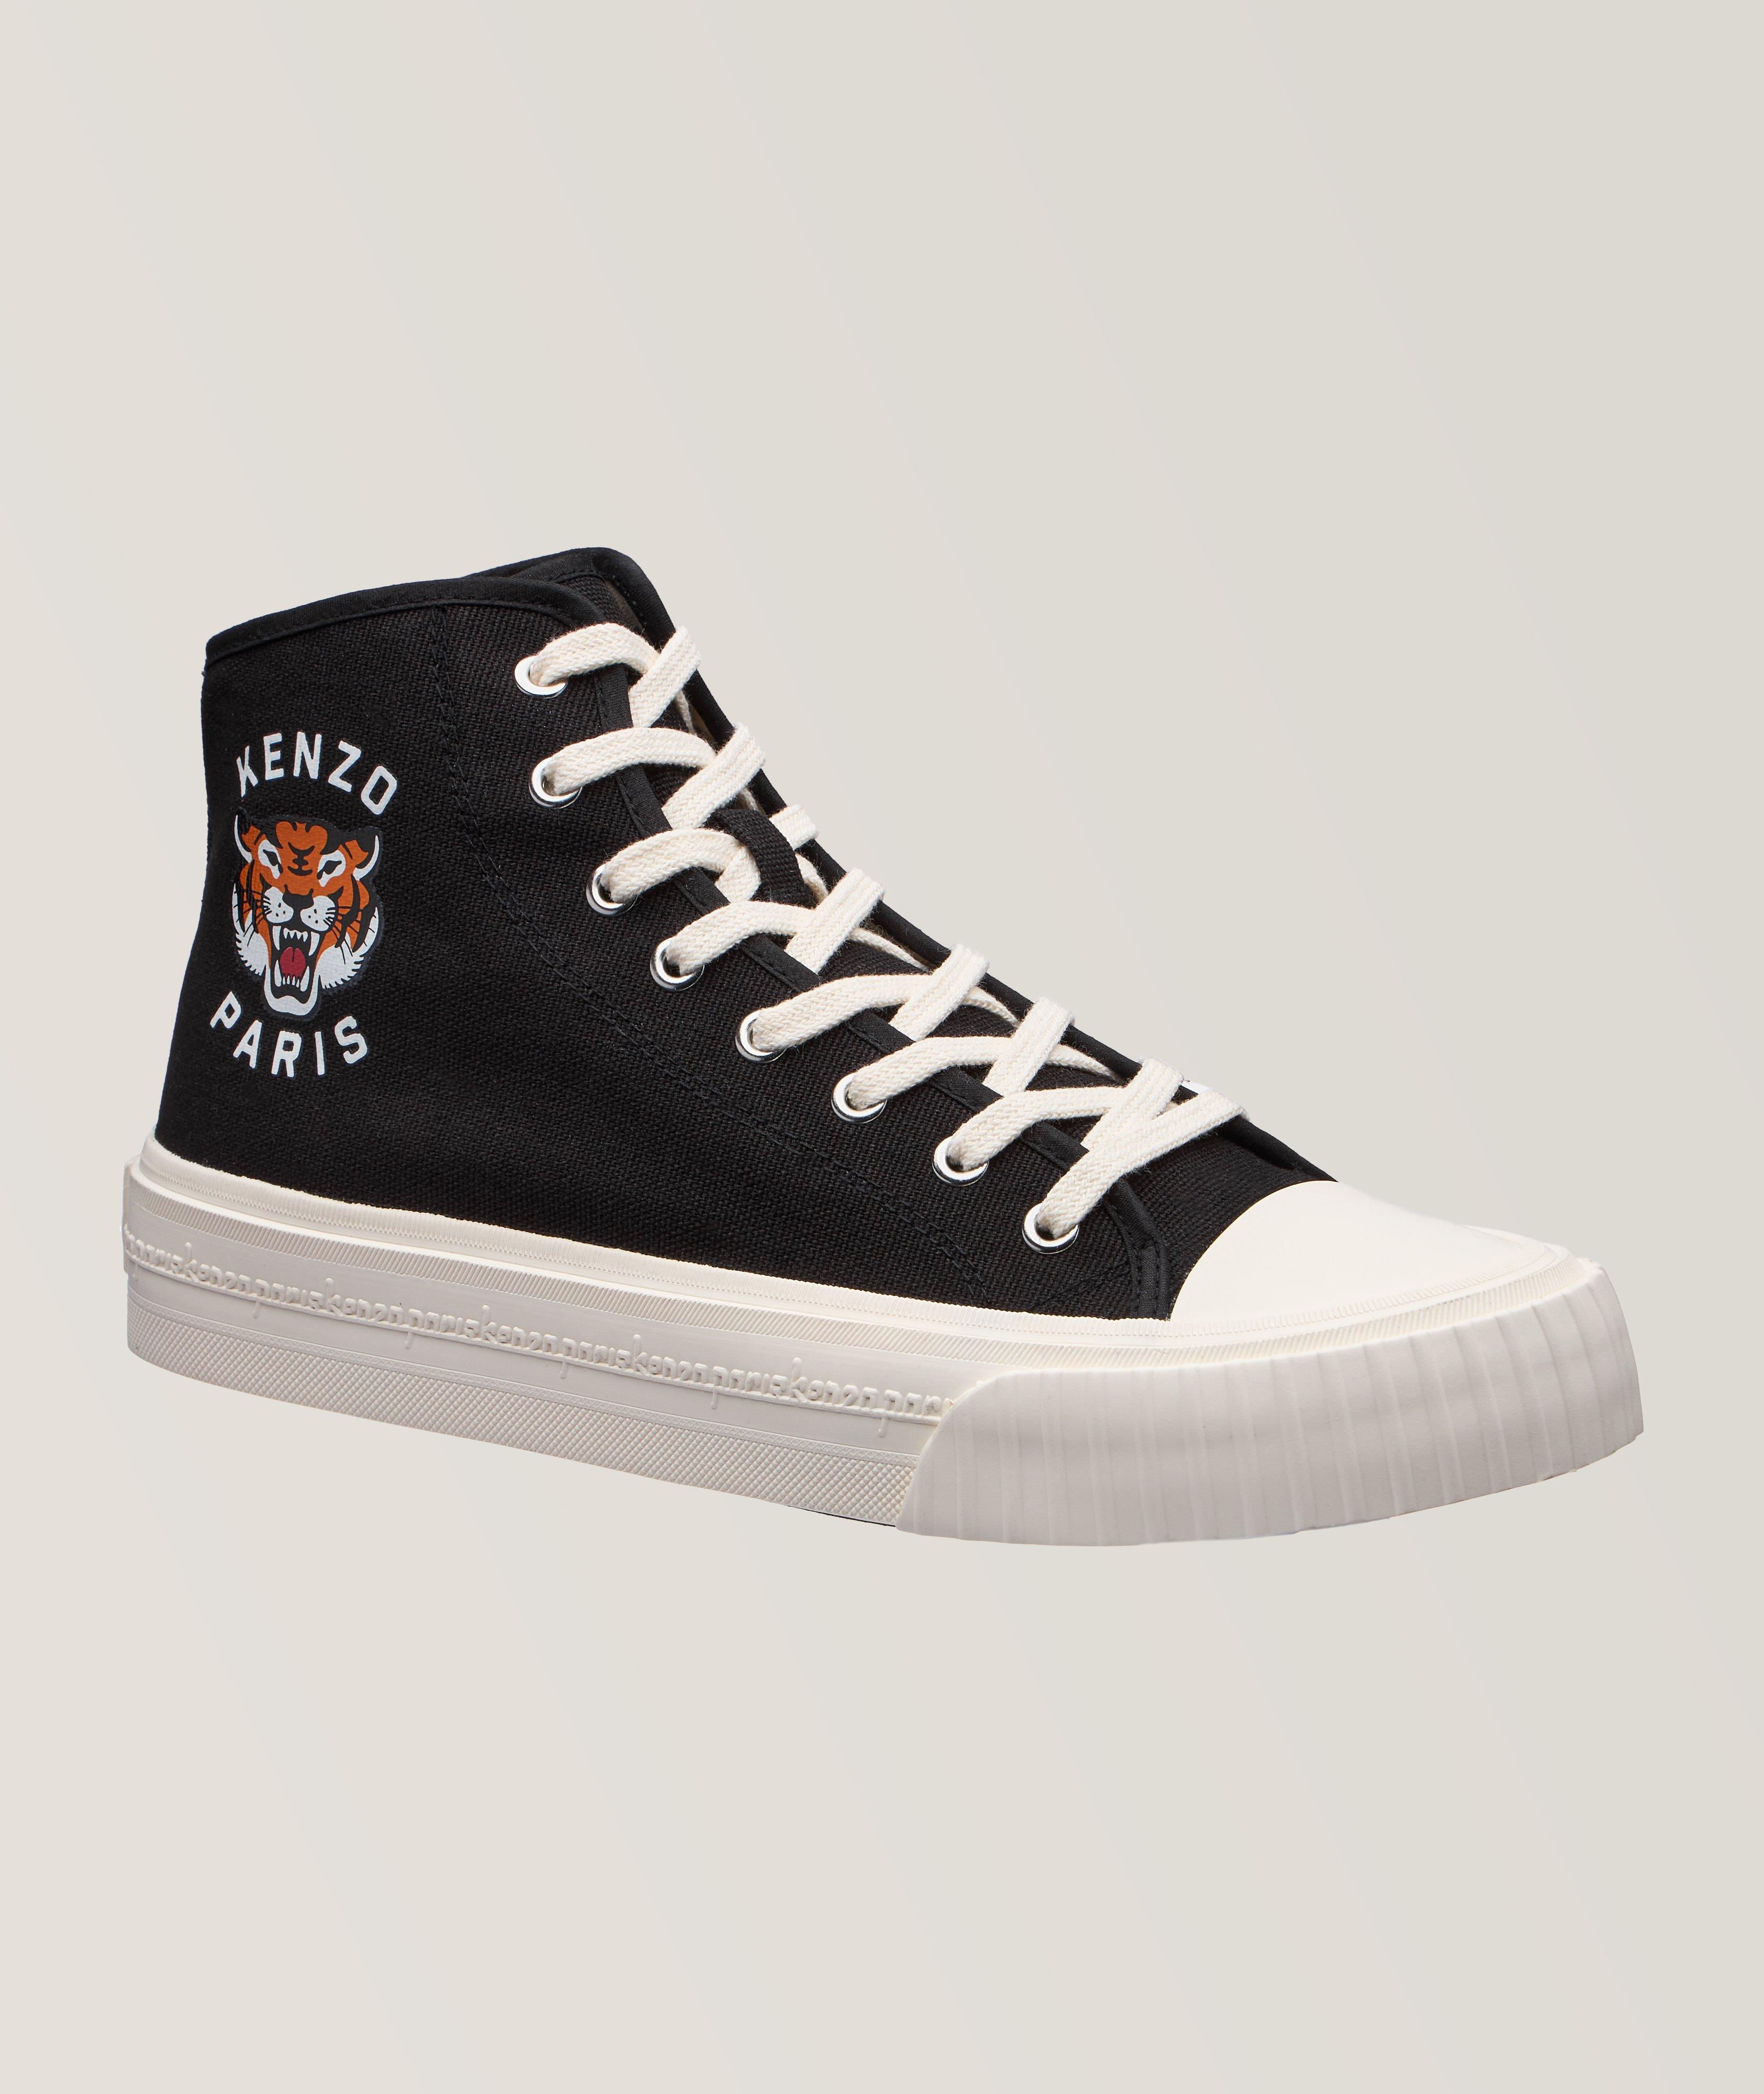 Foxy High-Top Trainers image 0